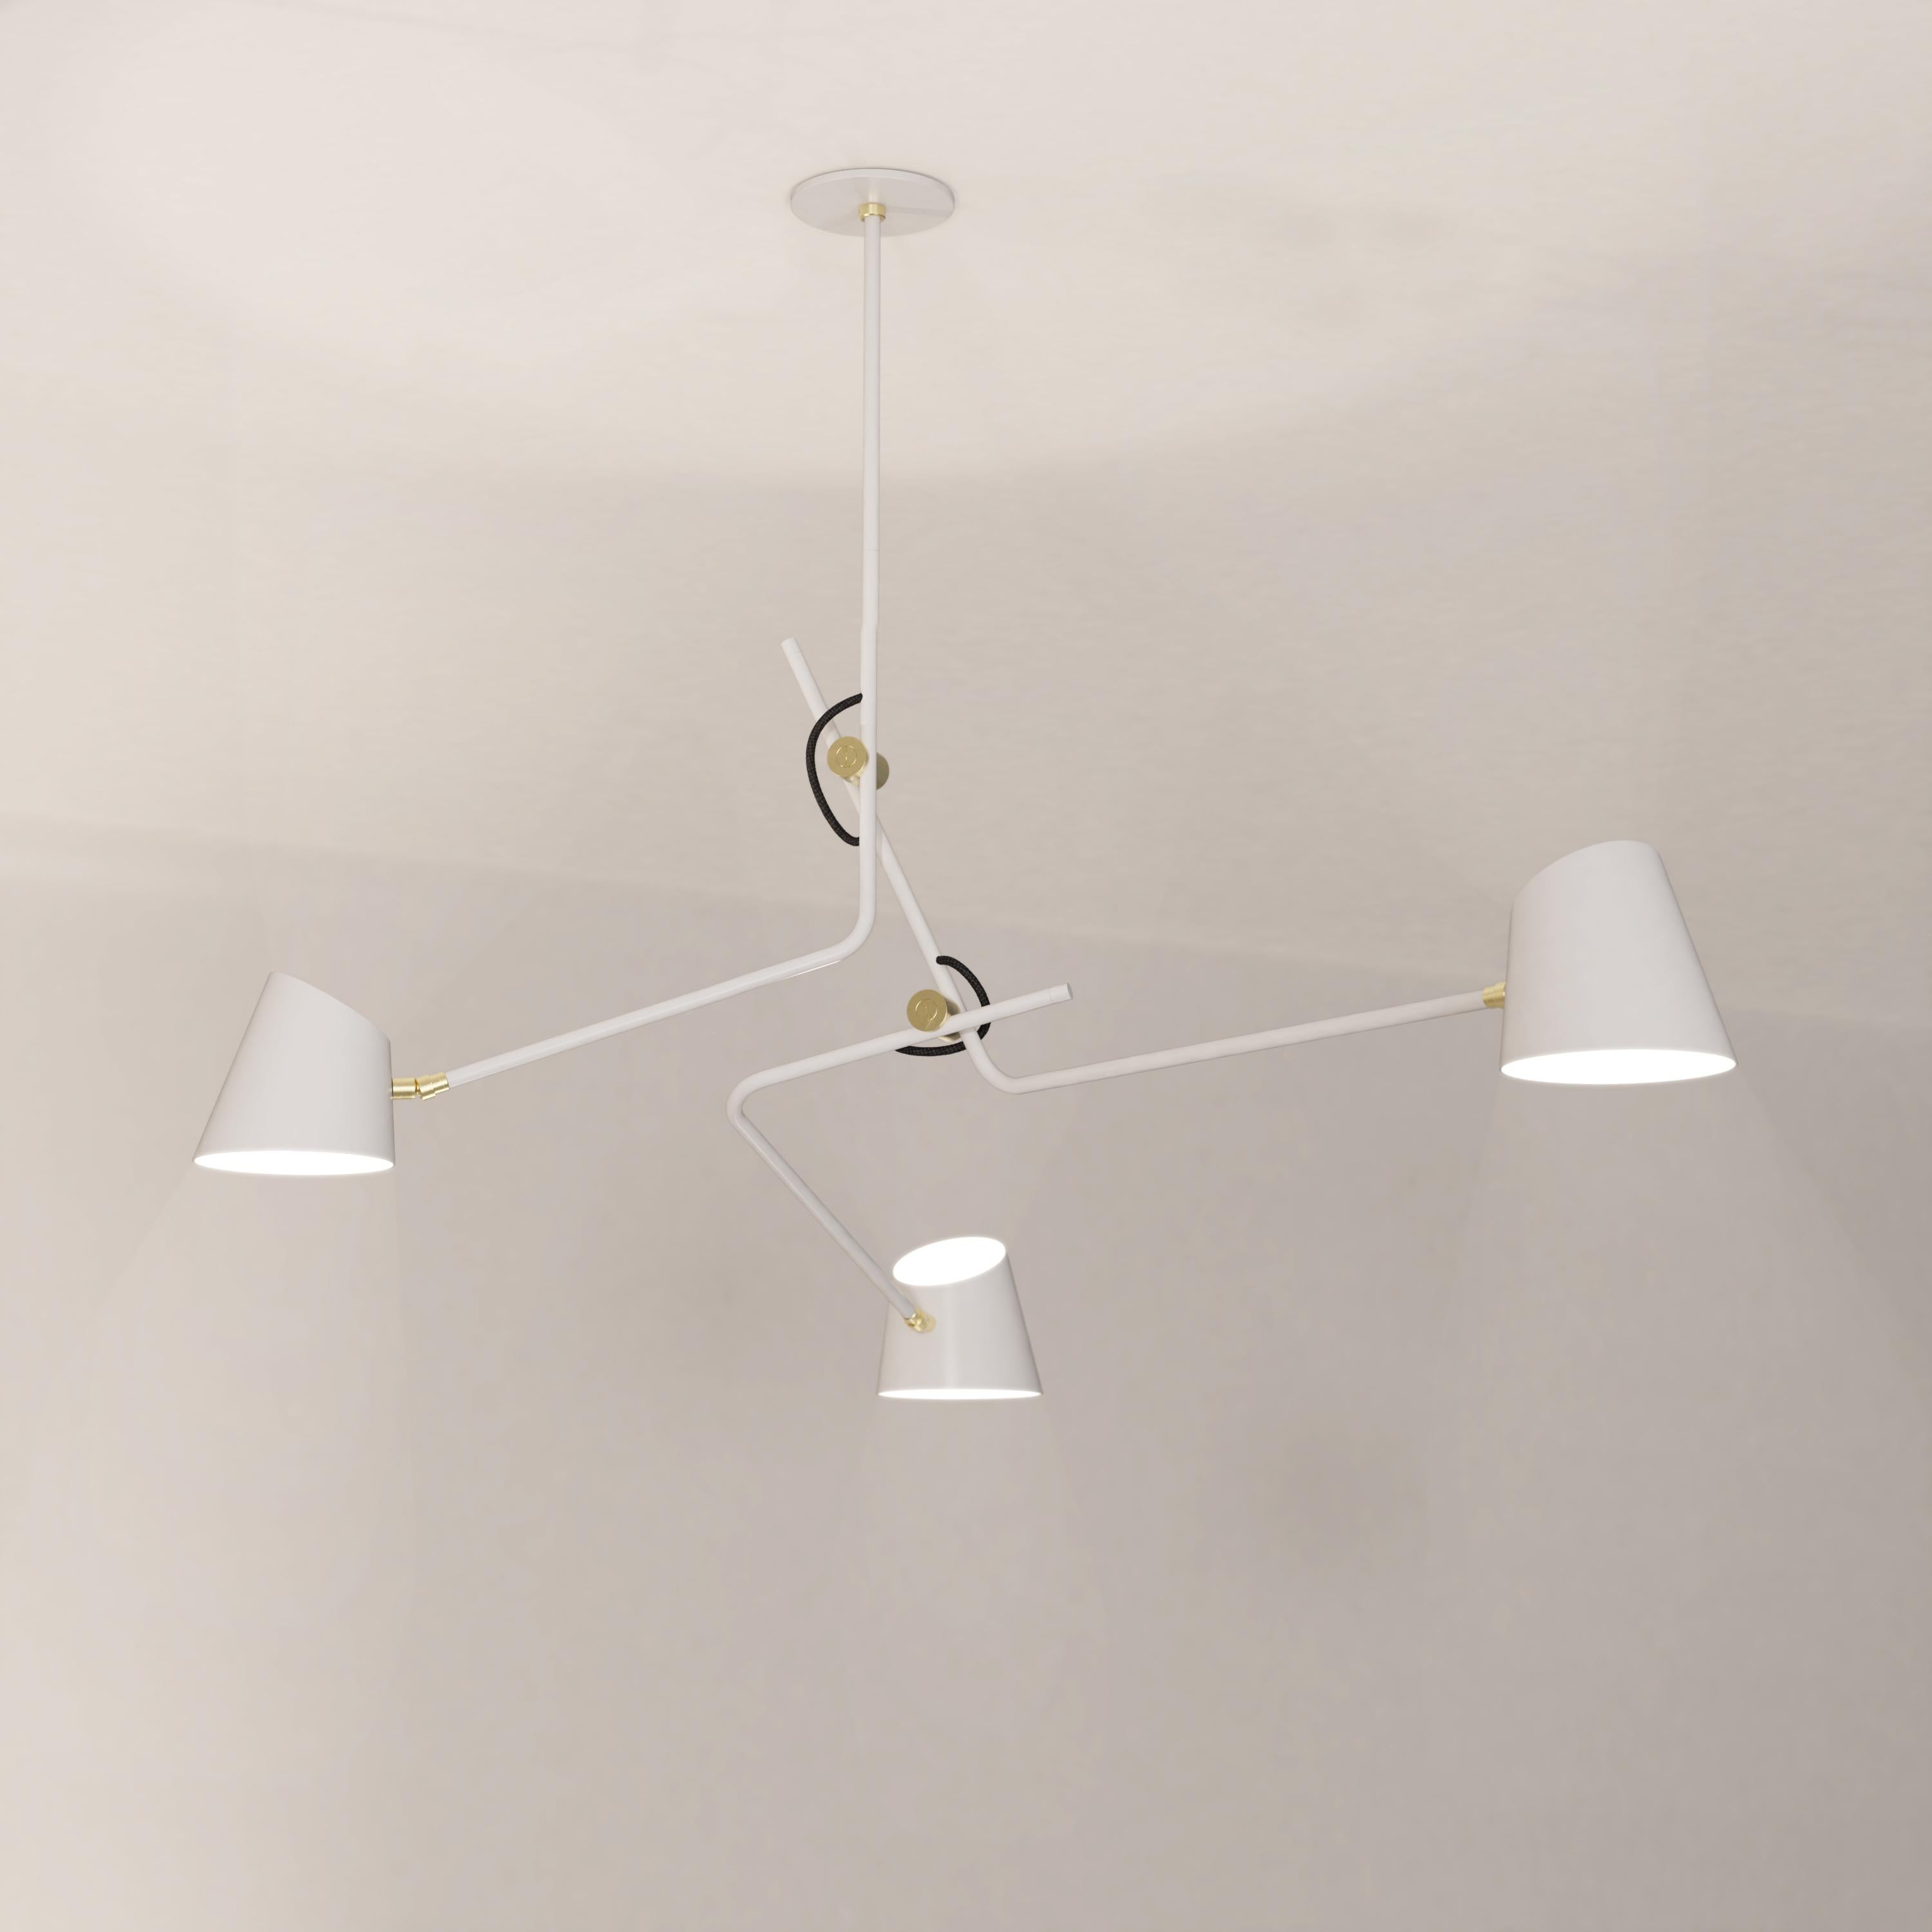 Design by Alexandre Joncas

Hartau Triple is the masterpiece of the collection. With its stunning lines and details it combine lightness and finesse in an impressive montage.

The Hartau collection brings together classical light fittings that